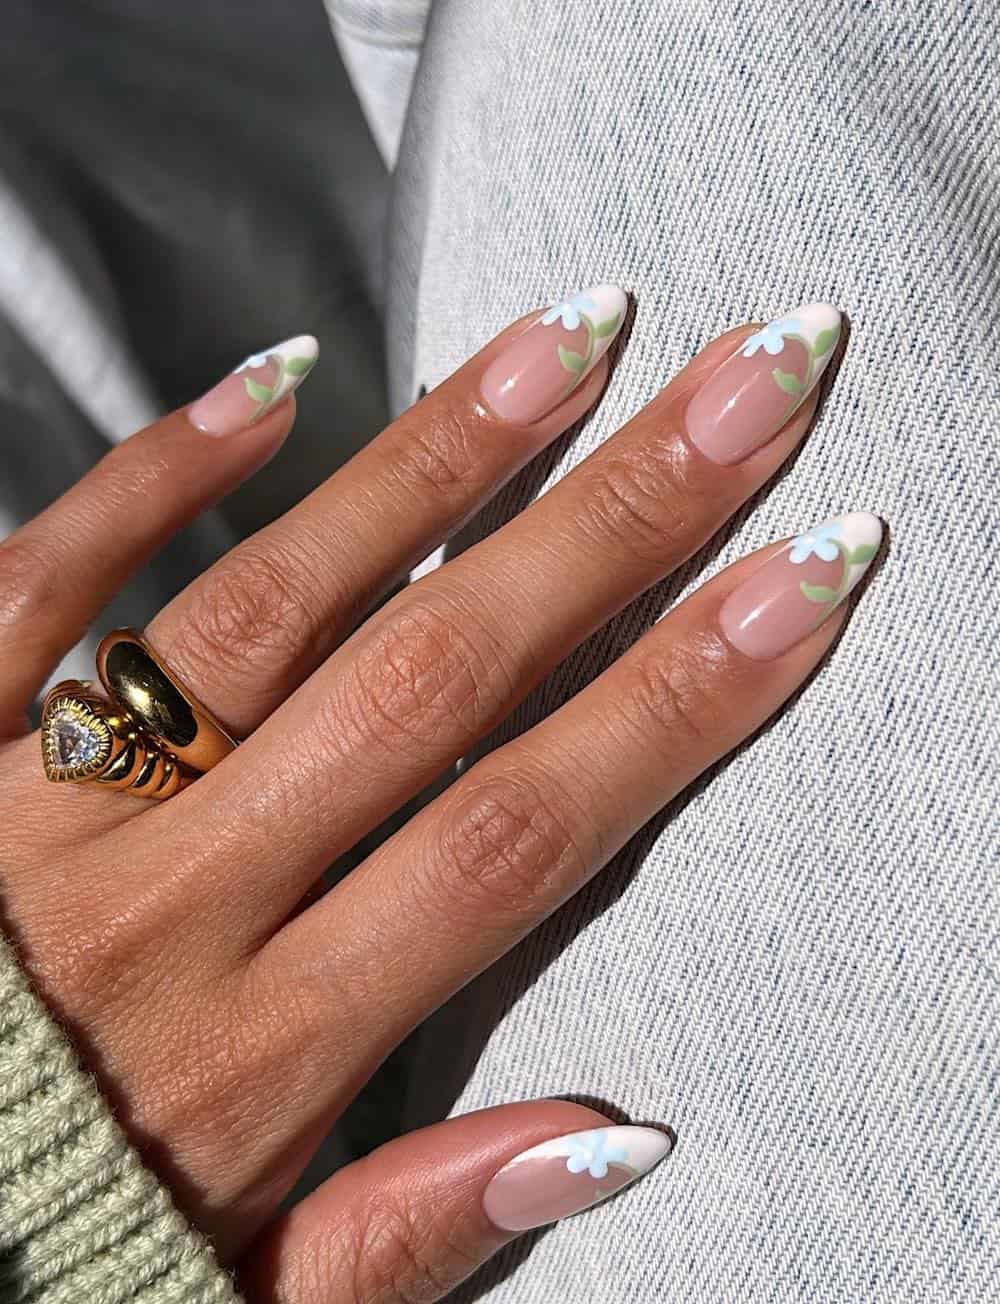 A hand with medium almond nails painted with white French tips with blue flowers and green leaves